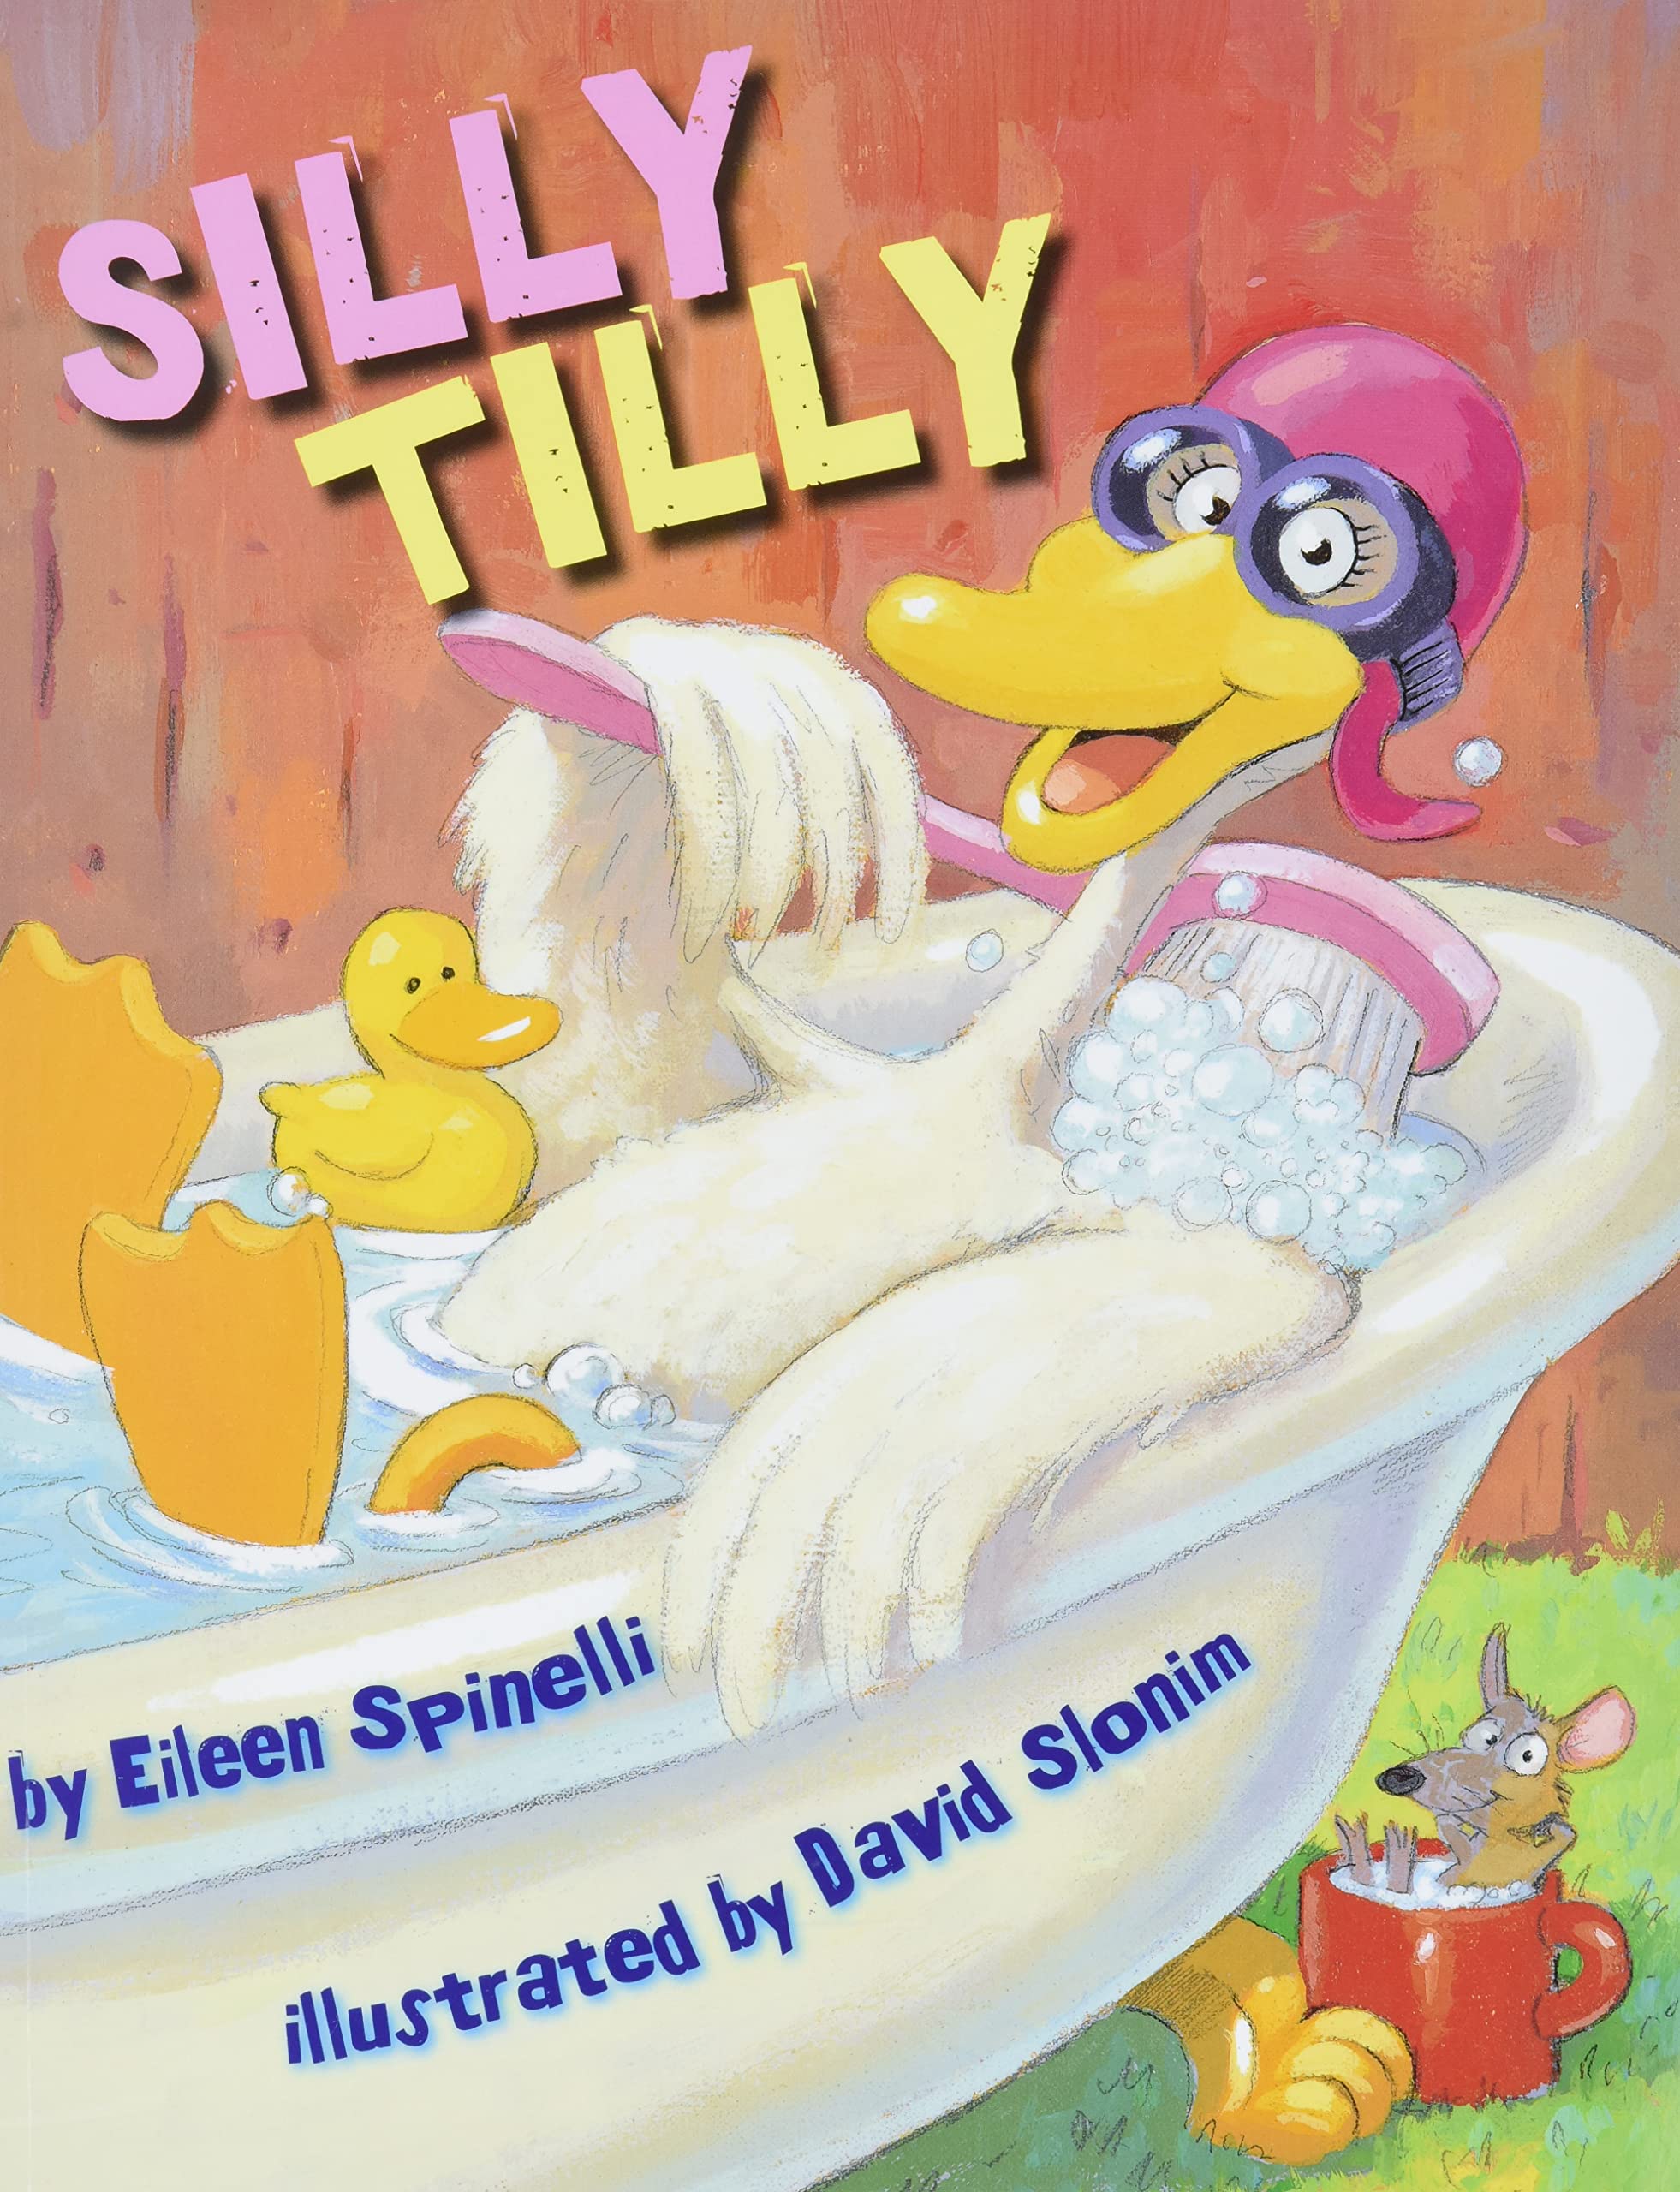 speech and language teaching concepts for Silly Tilly in speech therapy​ ​